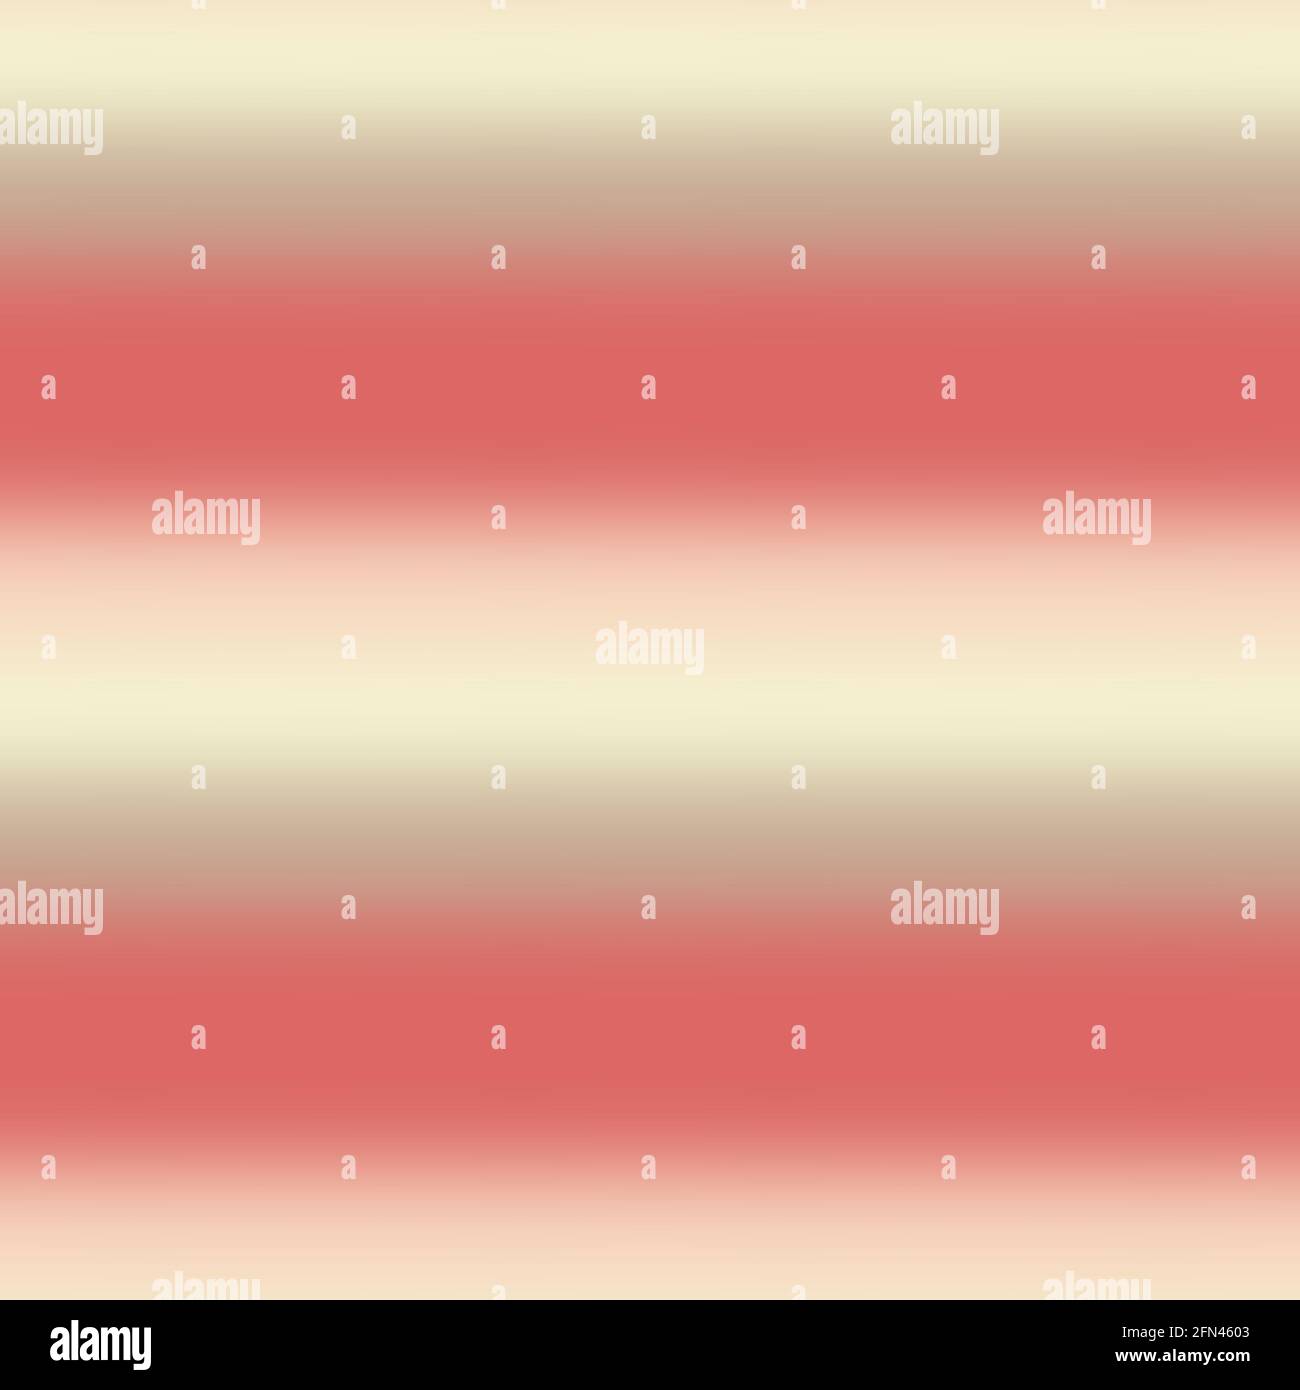 https://c8.alamy.com/comp/2FN4603/blurry-ombre-blend-gradient-stripe-background-variegated-pastel-horizontal-line-melange-seamless-pattern-abstract-out-of-focus-all-over-print-retro-2FN4603.jpg